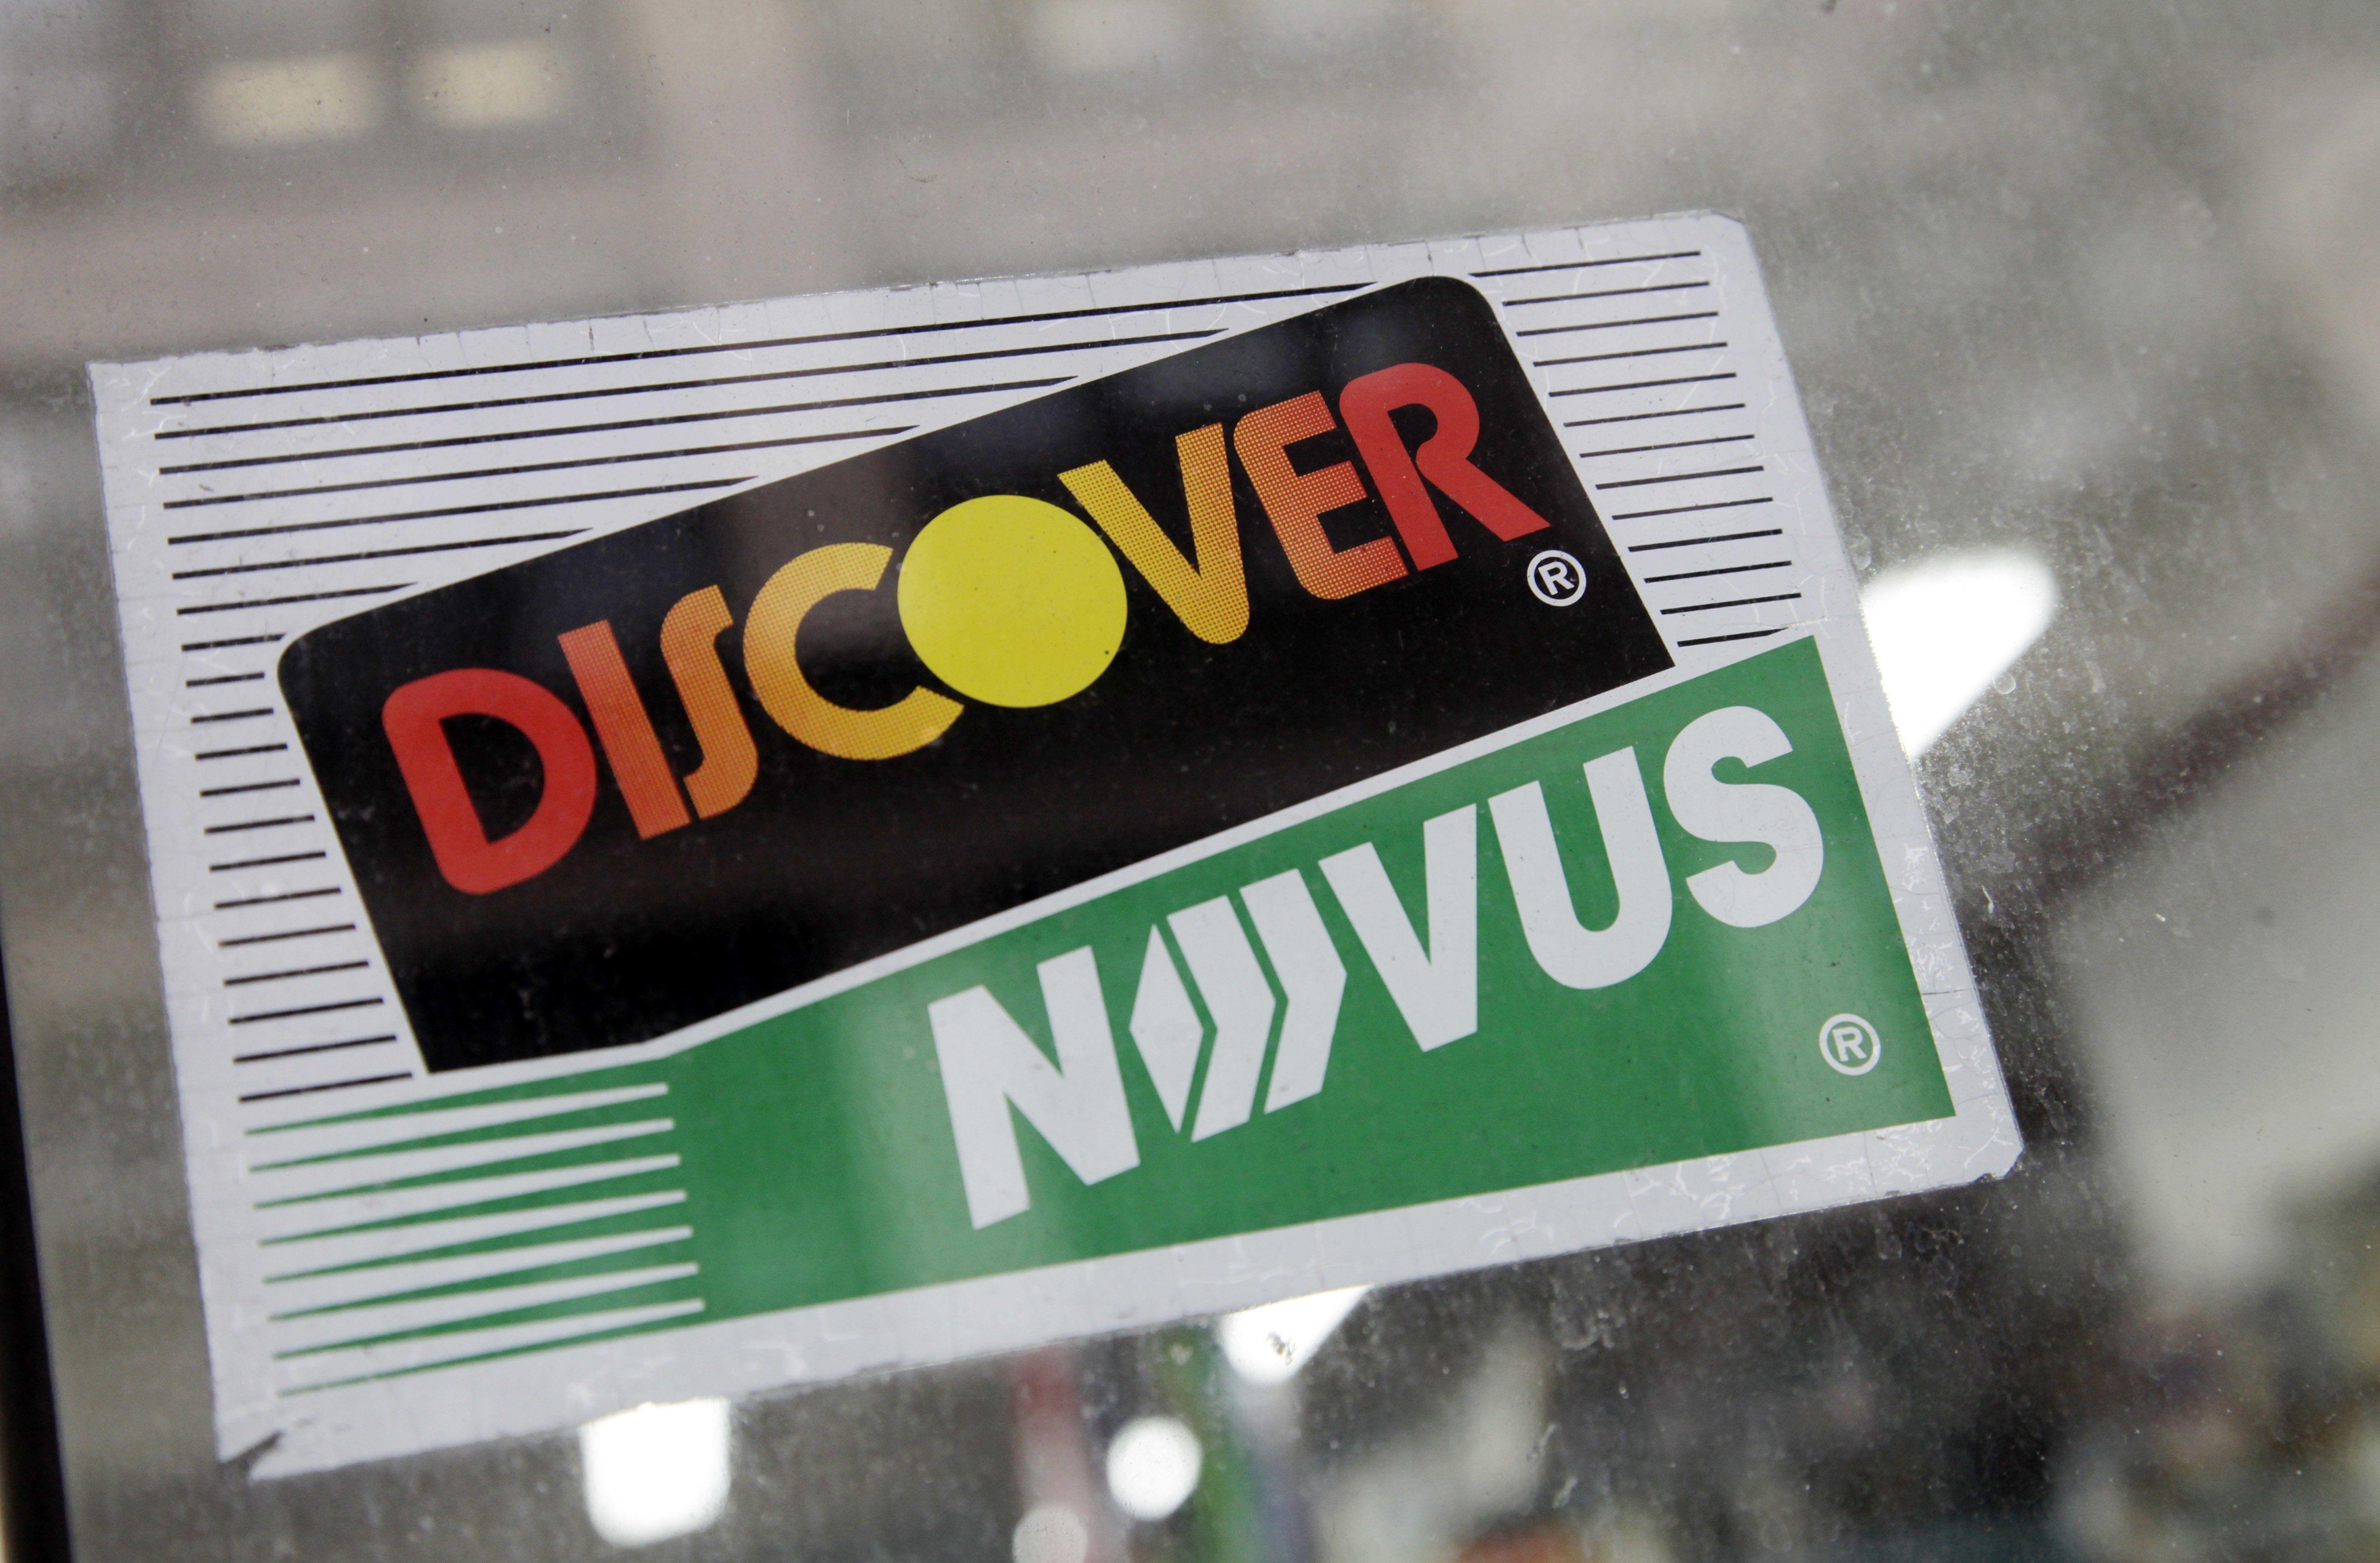 Discover Novus Logo - Discover Financial's Profit Rises on Loan Growth - WSJ